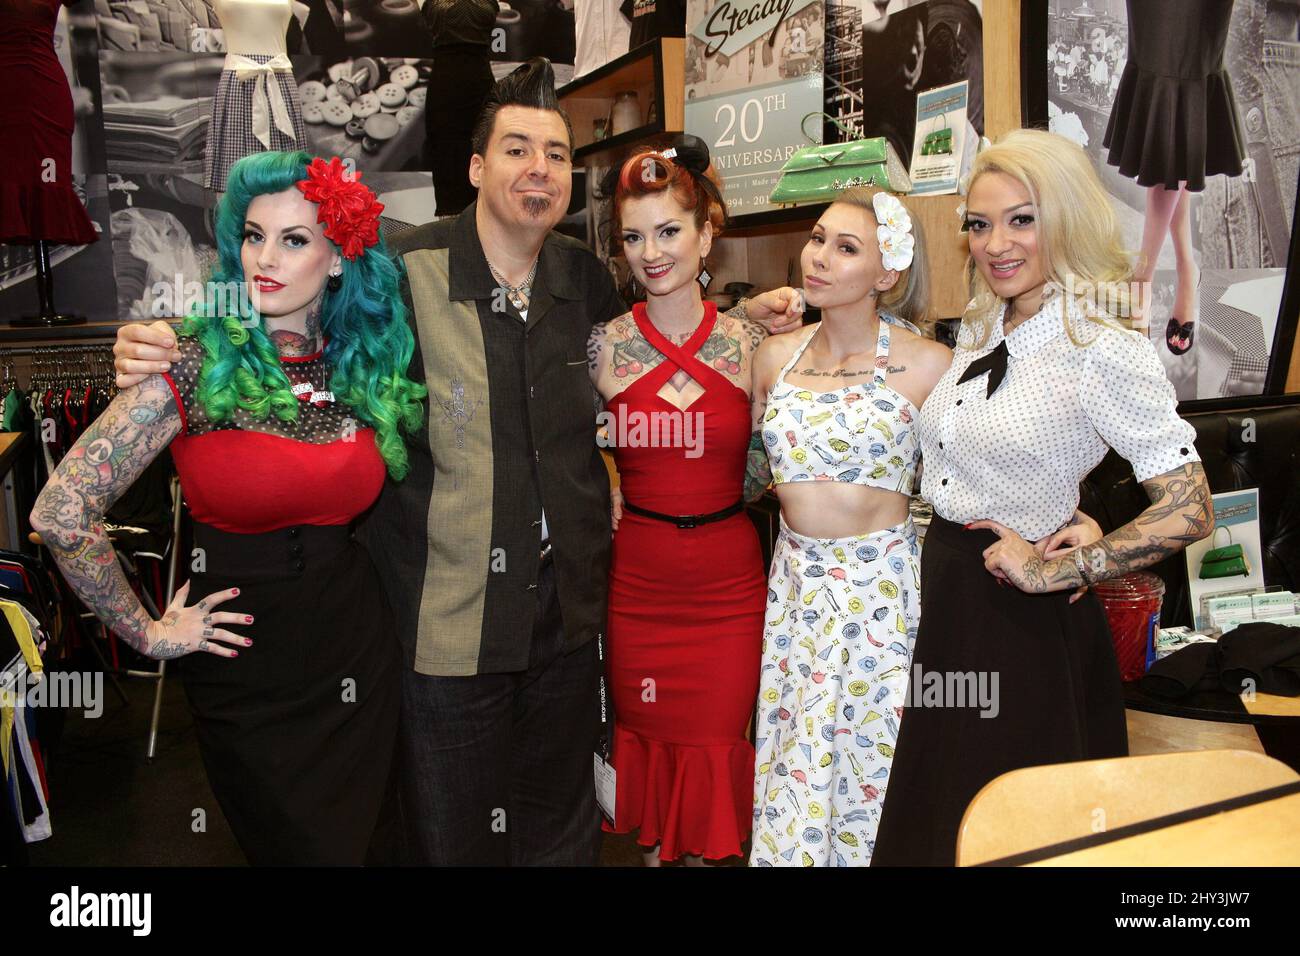 Joe Capobianco, Miss Rockwell De'Vil, Kandy K, Cherry Dollface and Krisskaboom attends the 2014 MAGIC Market Week Convention held at the Las Vegas Convention Center, Las Vegas, Nevada, February 18, 2014. Stock Photo